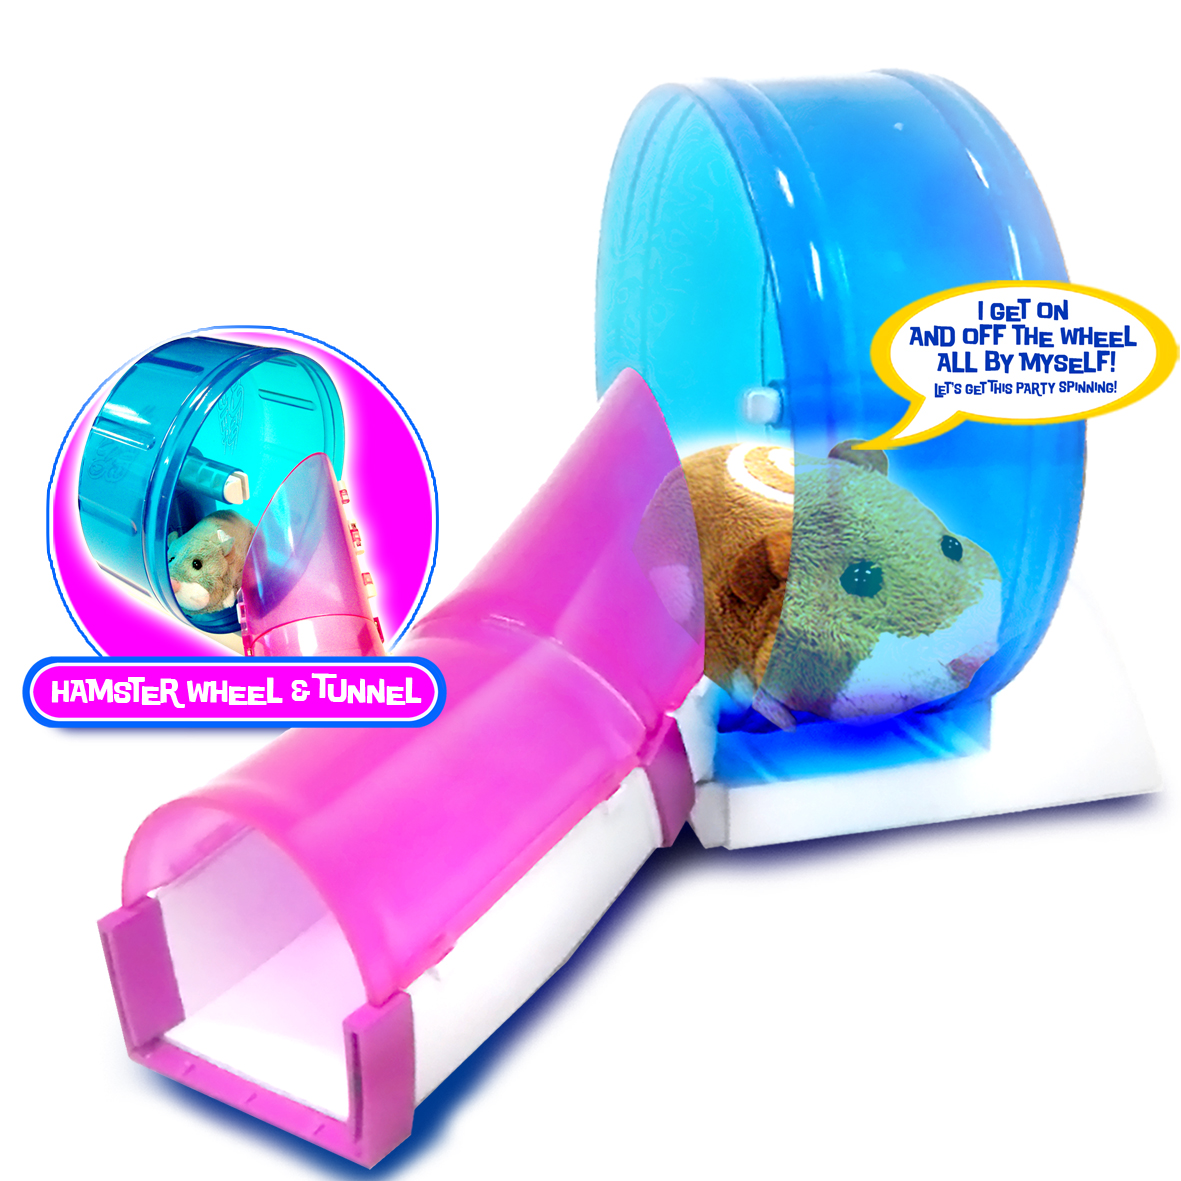 Unbranded Hamster Add-on Playset-hamster Wheel and Tunnel